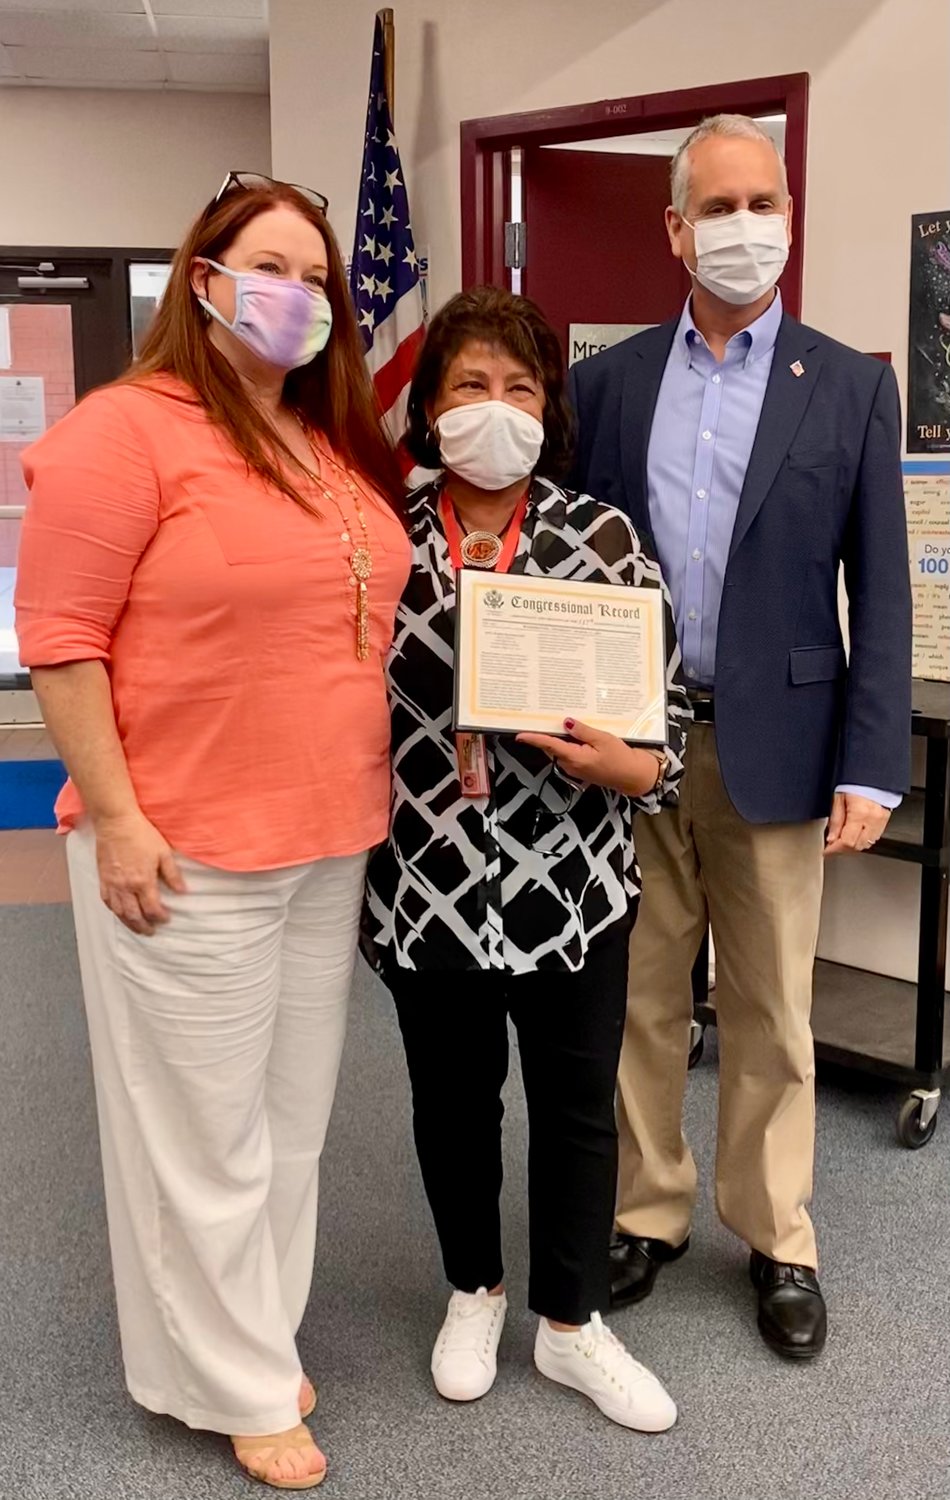 School Board Member, Stephanie Busin (left) and Congressman Mario Diaz-Balart, congratulate Margarita Nelson (middle) on being the 2021 South Florida Women’s History Month honoree.